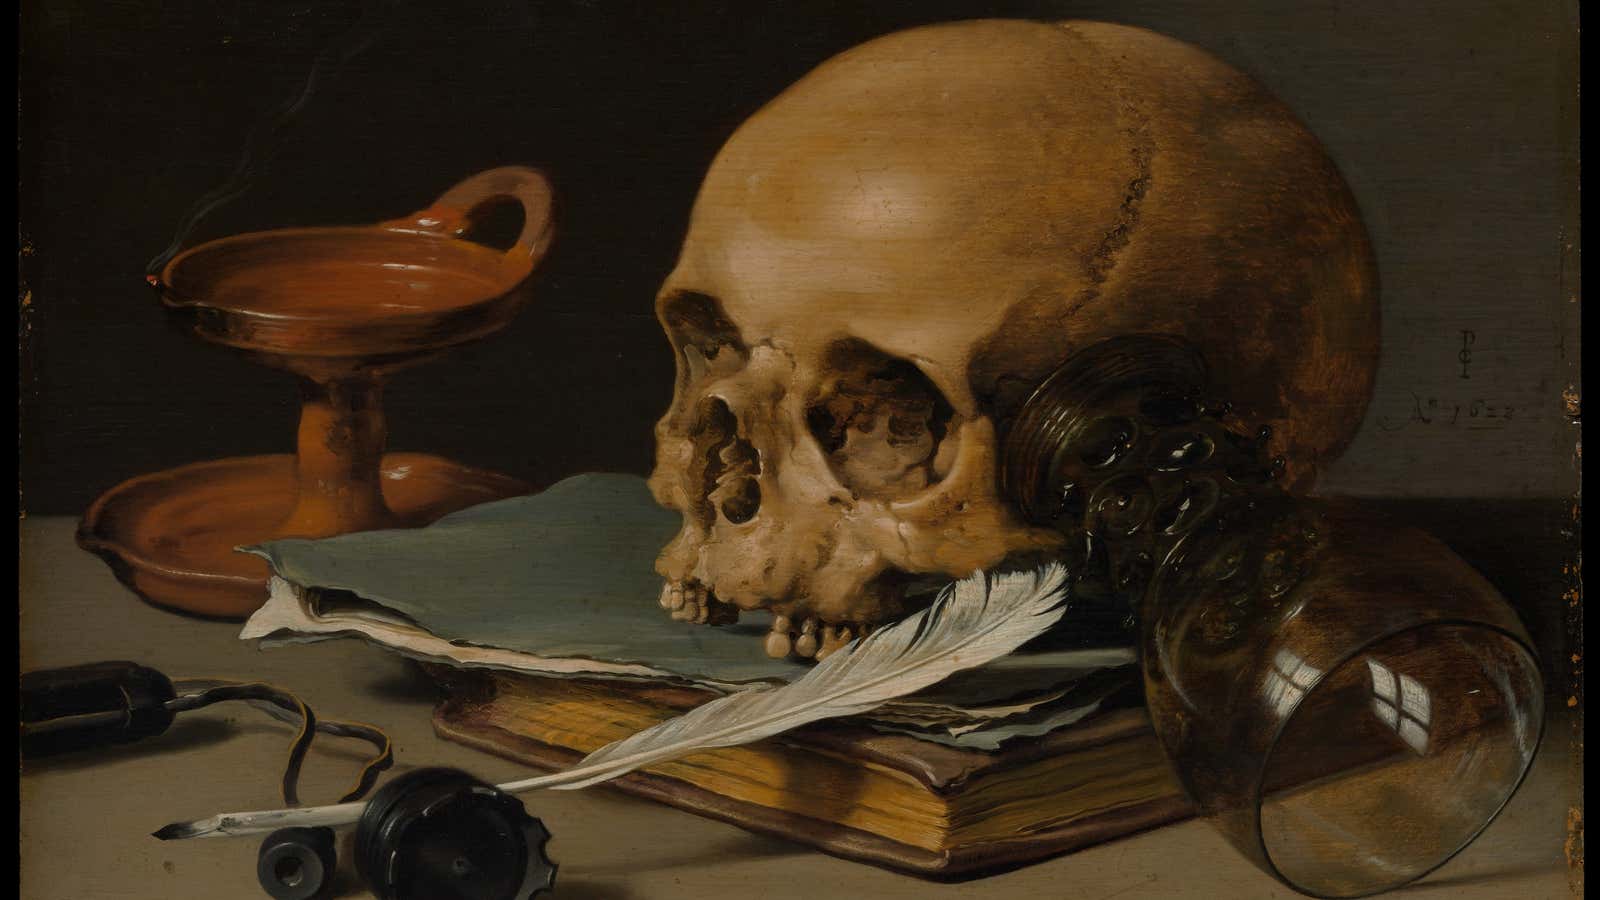 “Still Life with a Skull and a Writing Quill” (1628),
Pieter Claesz